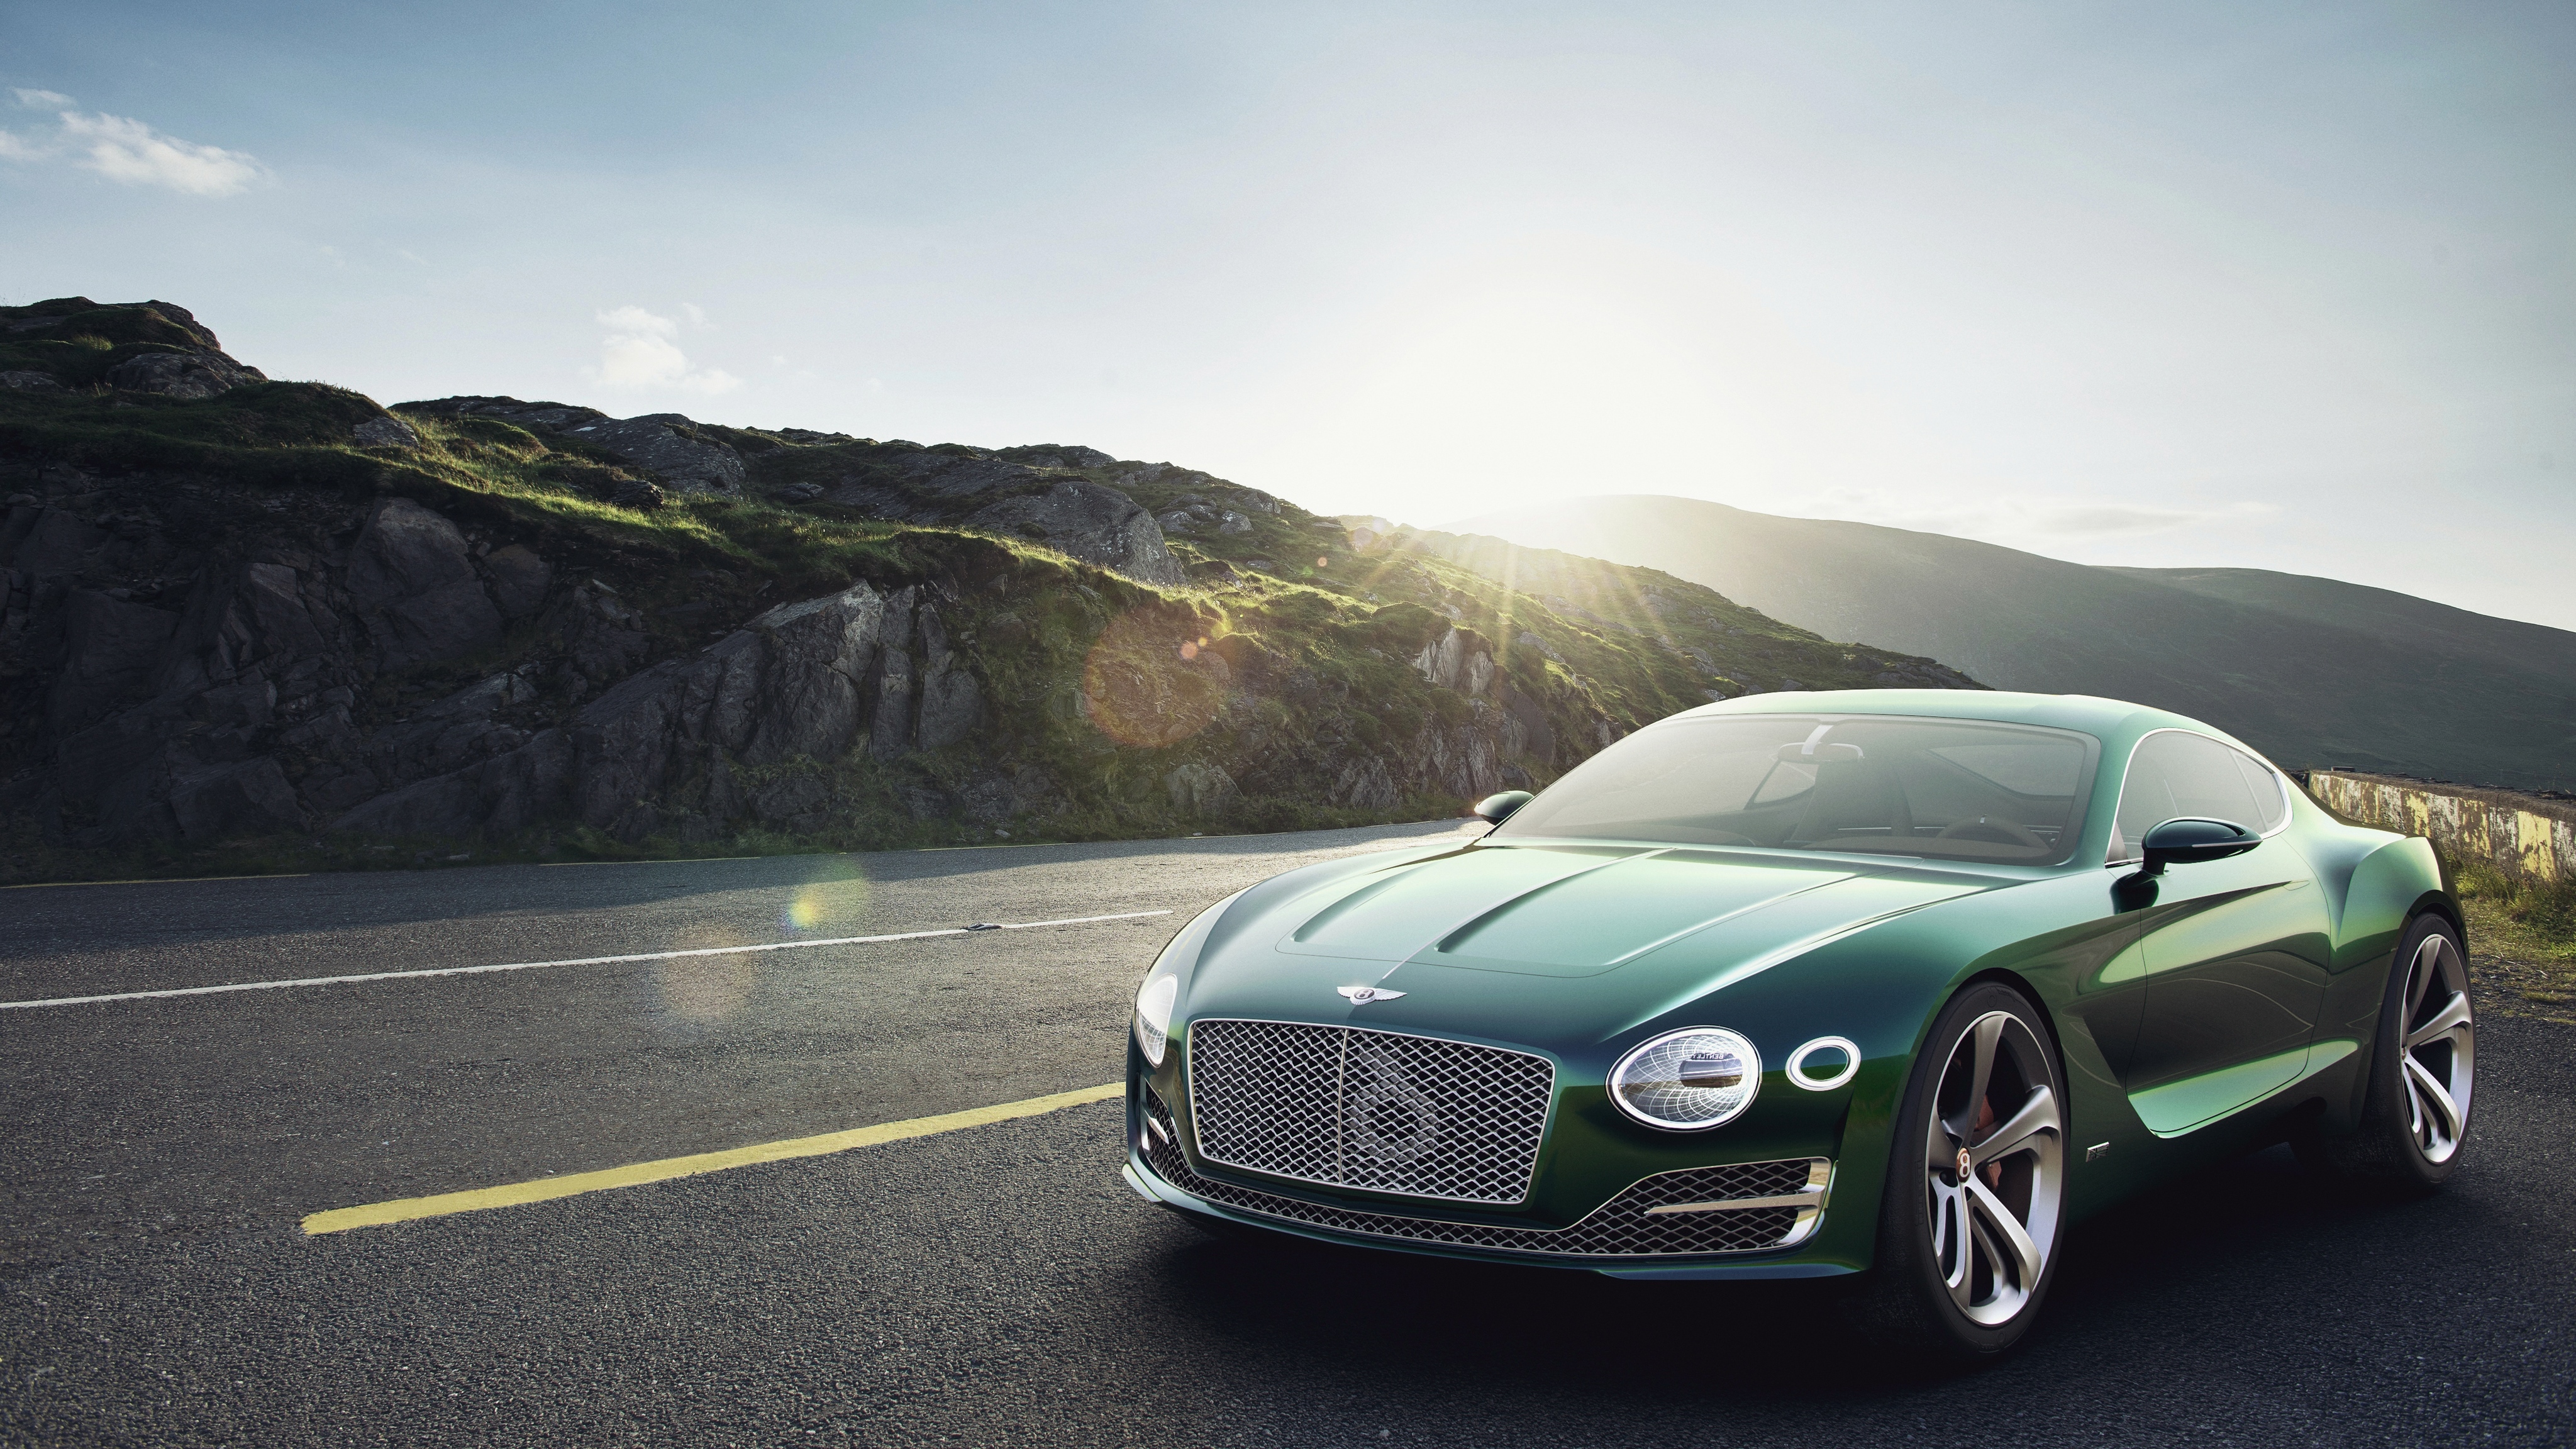 bentley, green, front view, cars, 2015, exp 10 Full HD